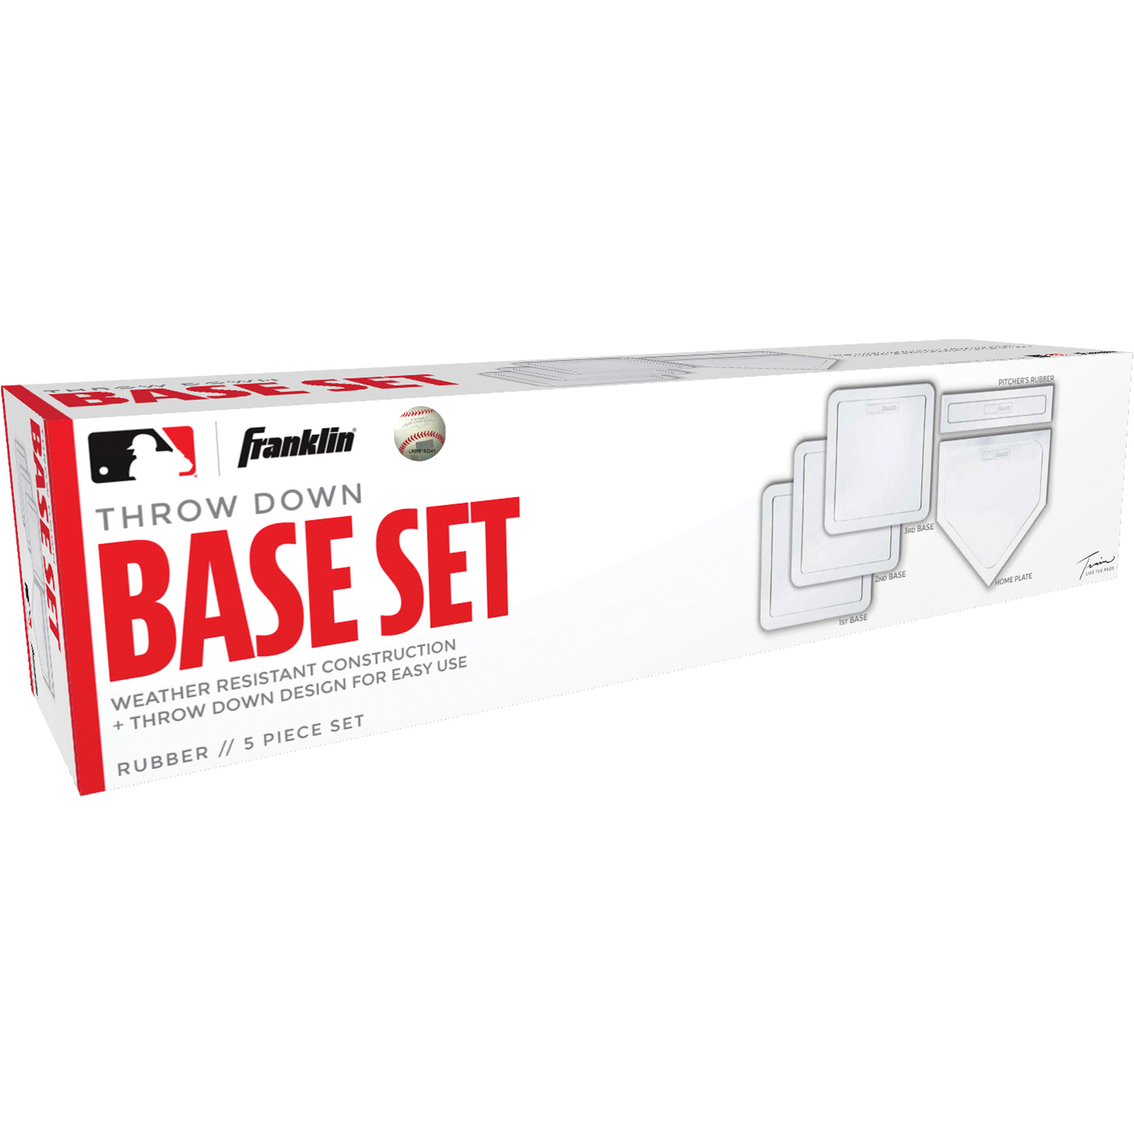 Franklin MLB Deluxe Rubber Base Set 4 pc. - Image 1 of 2